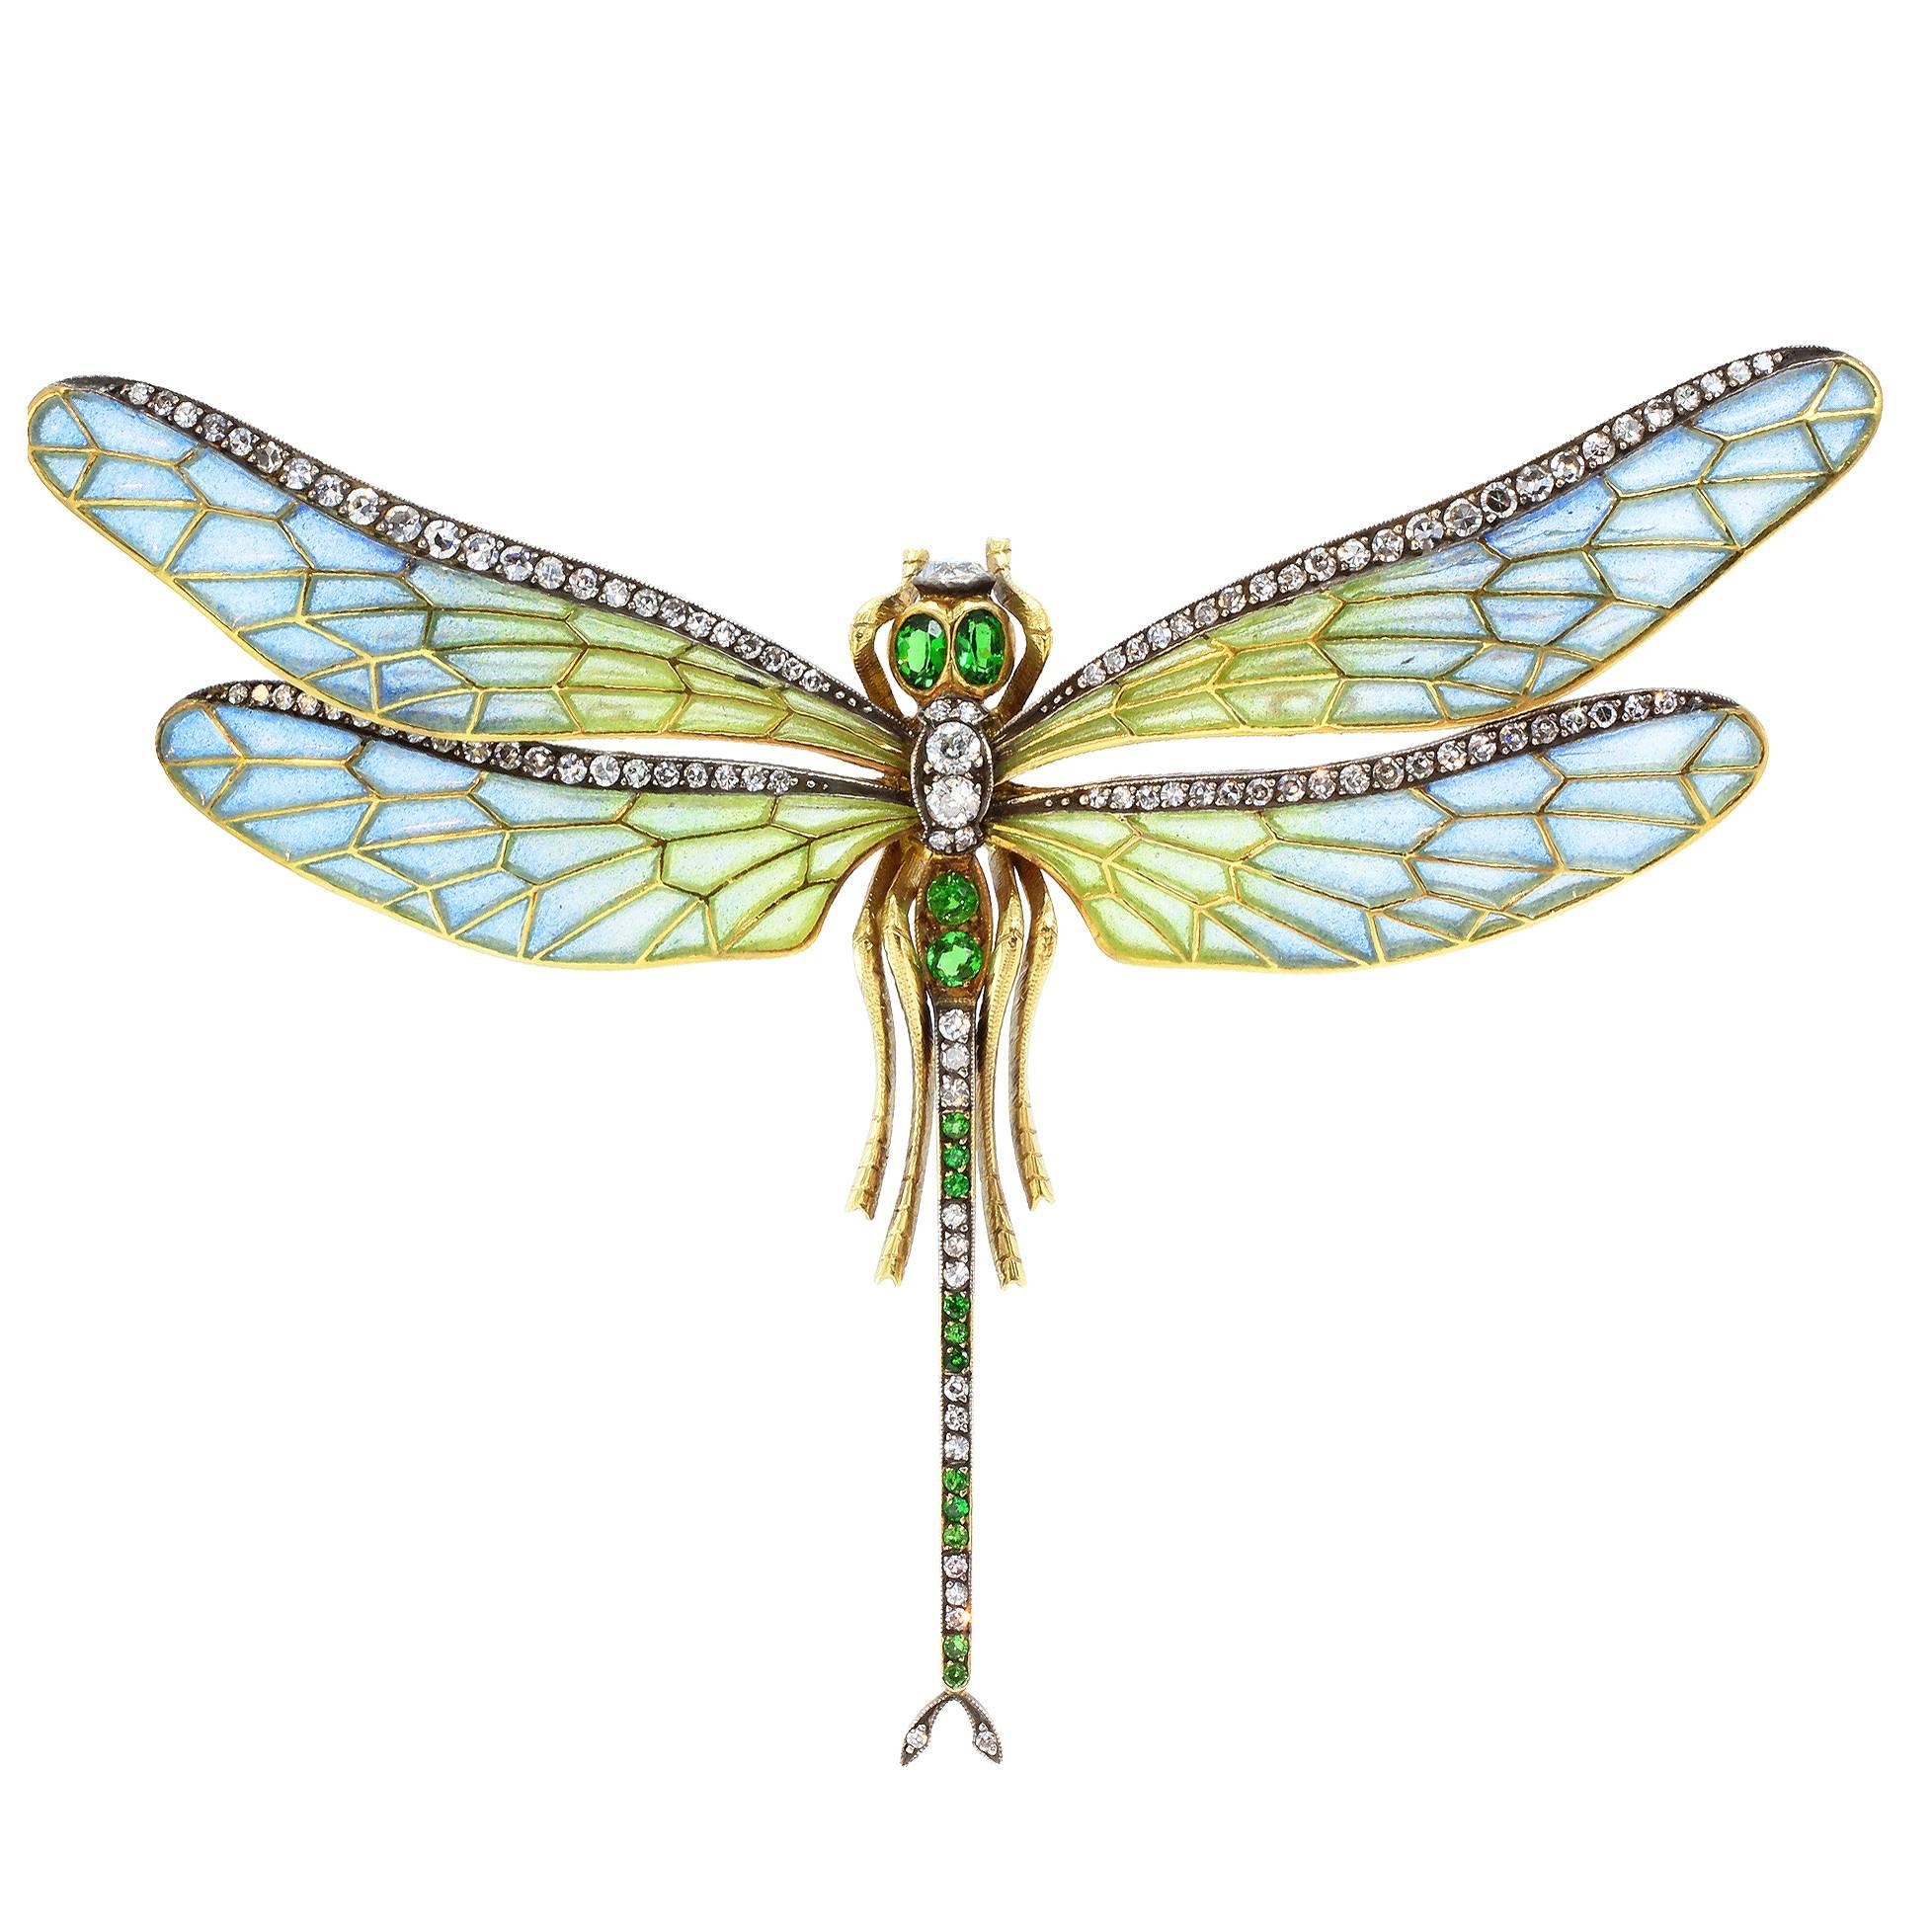  Plique-a-jour Dragonfly Pin For Sale